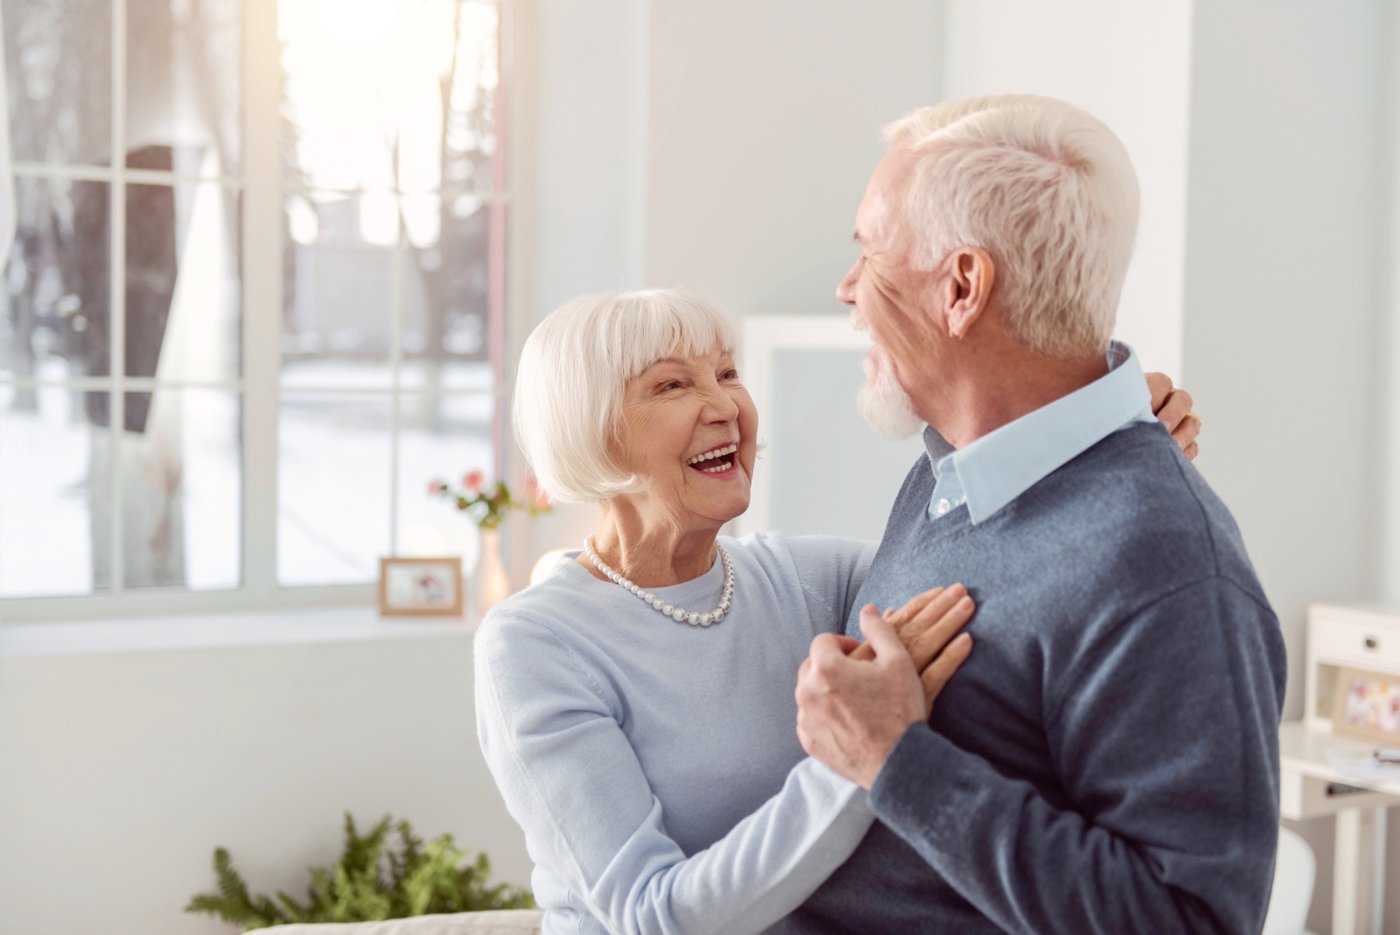 A senior couple dancing together